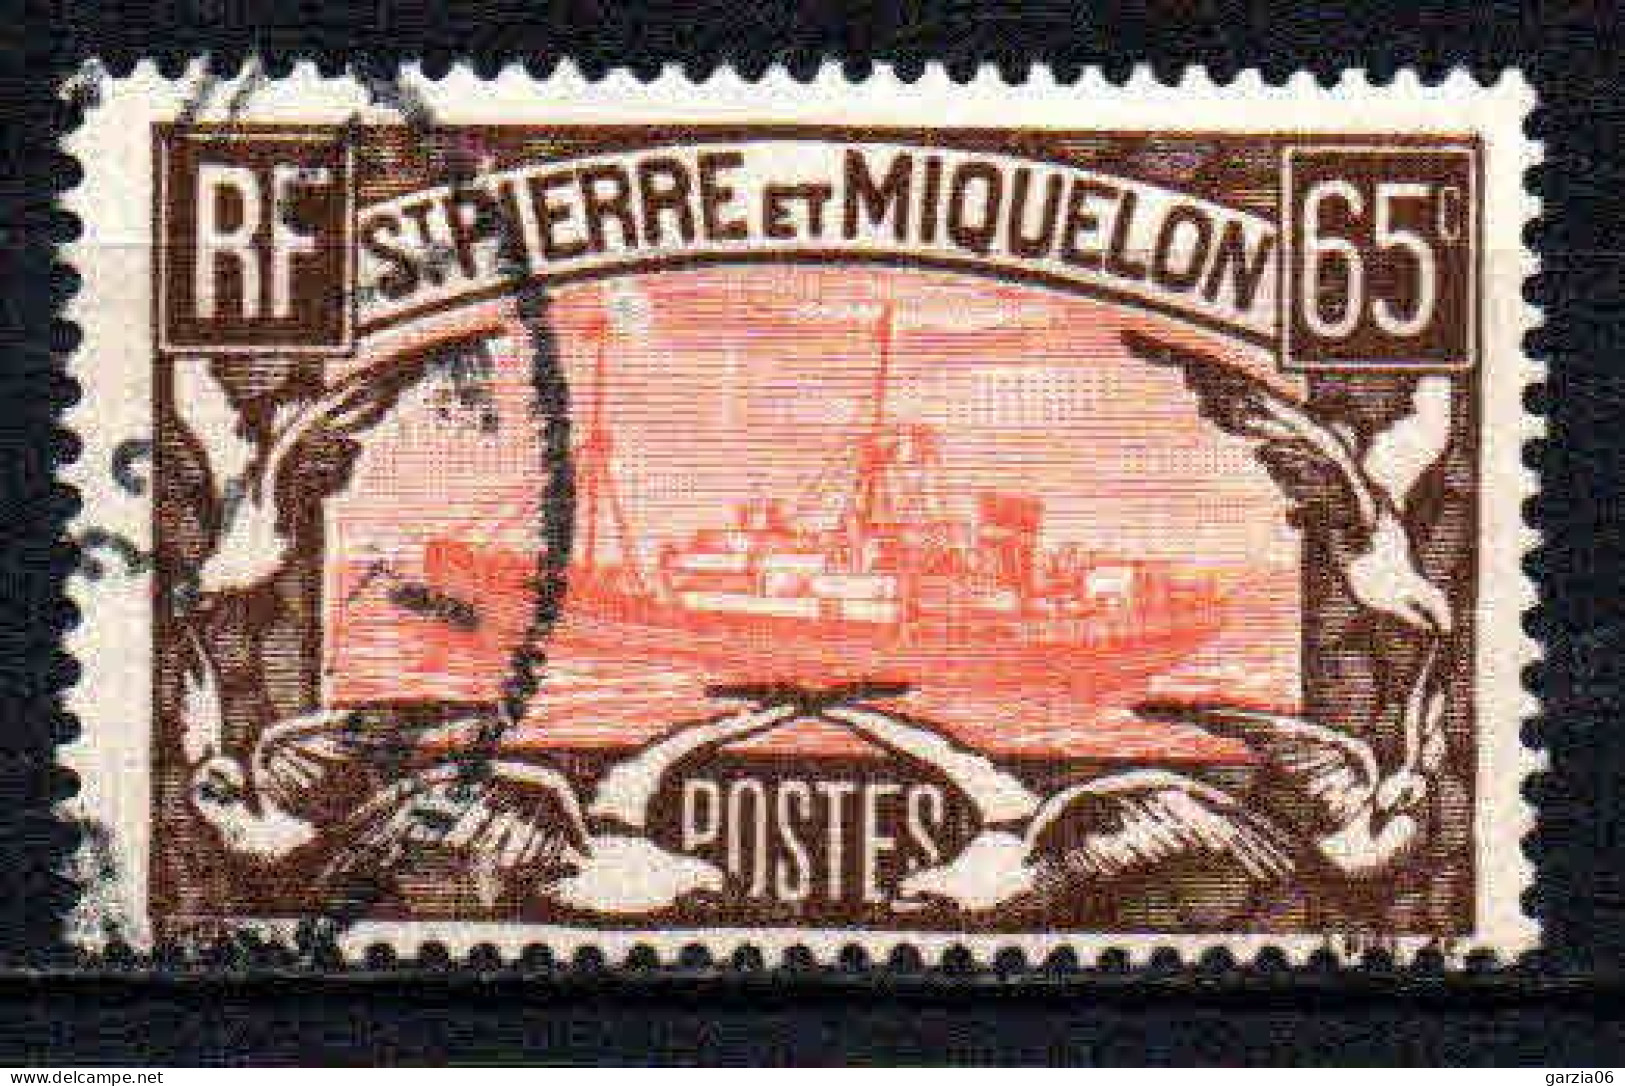 St Pierre Et Miquelon    - 1932 - Chalutier    - N° 148  - Oblit - Used - Used Stamps